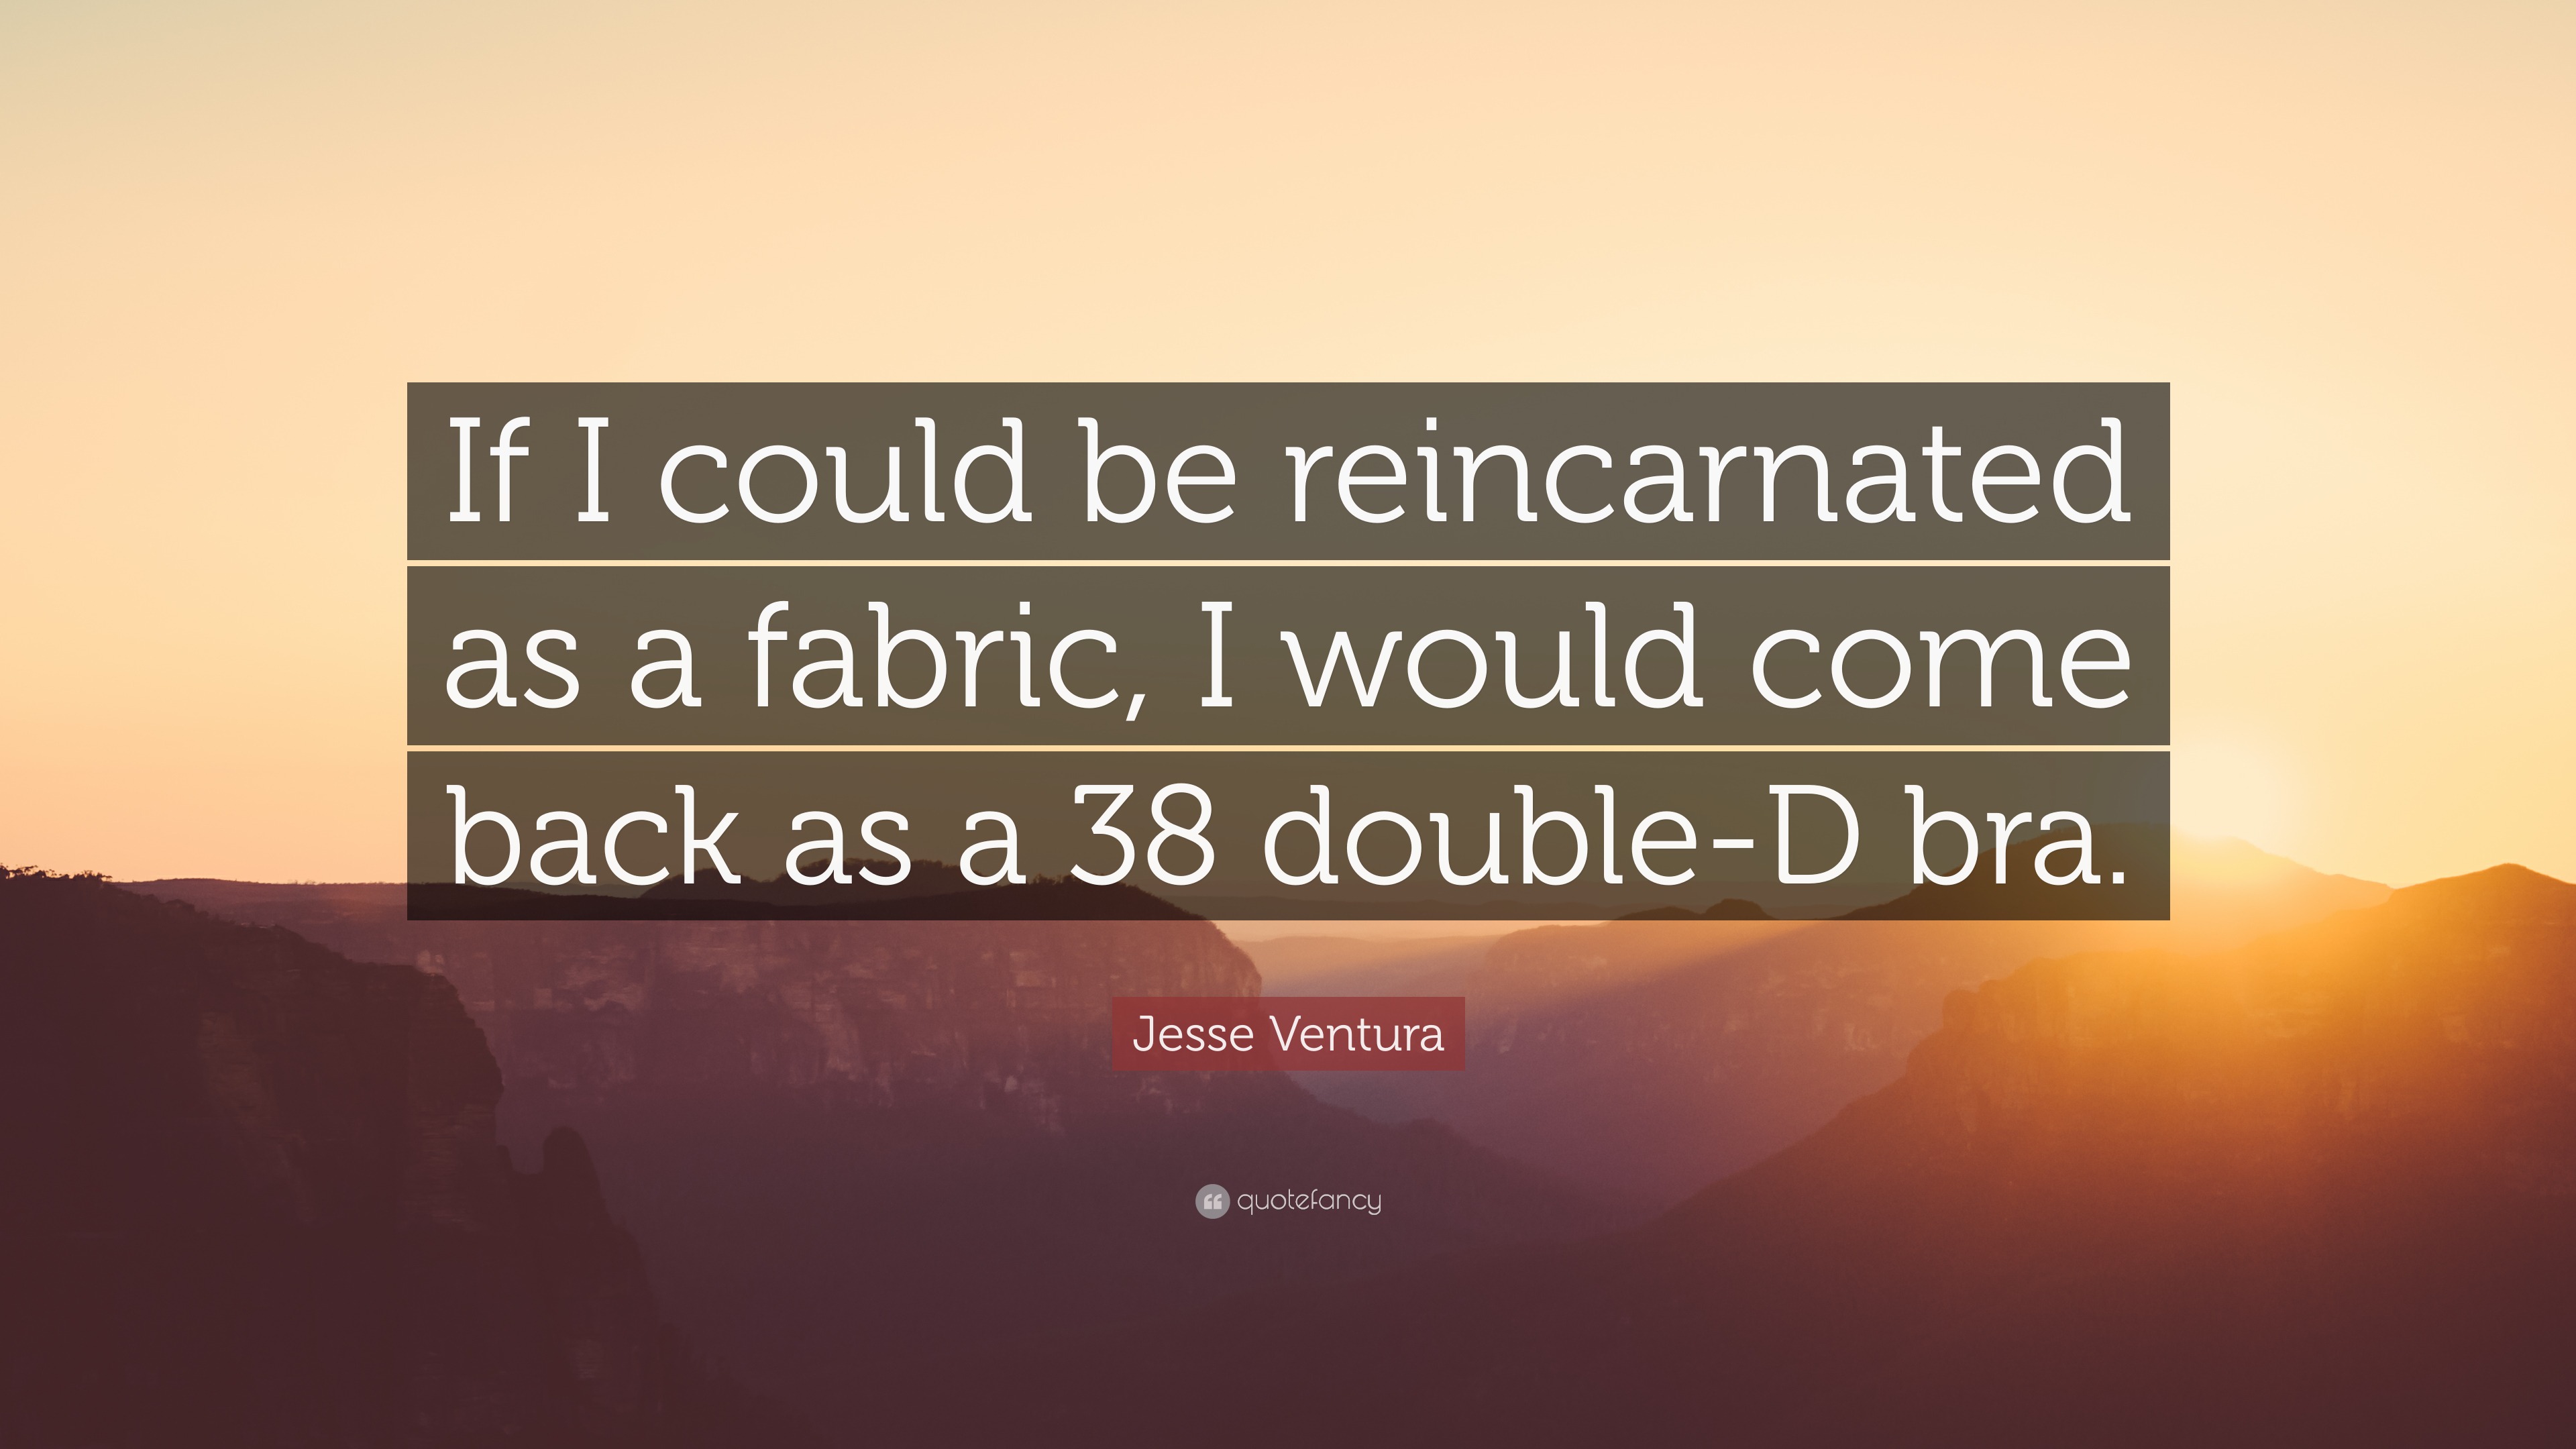 Jesse Ventura Quote: “If I could be reincarnated as a fabric, I